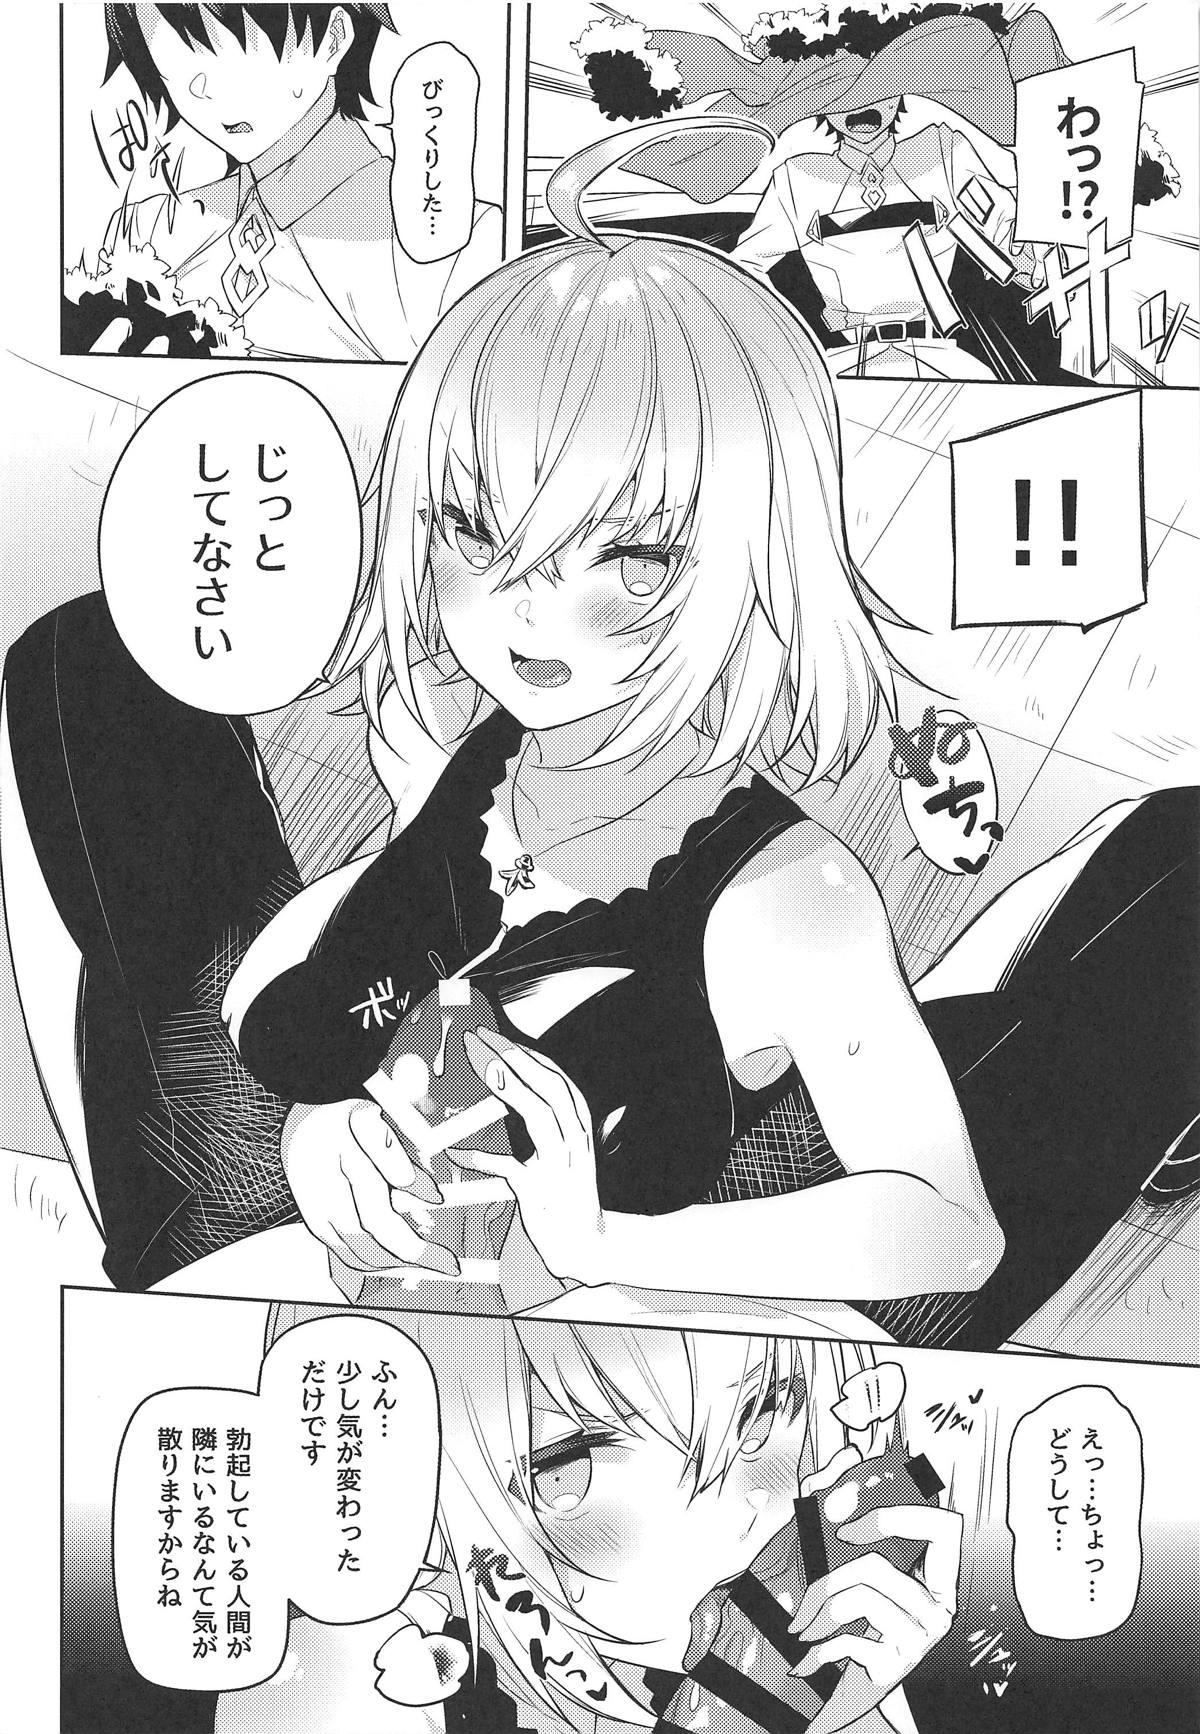 Hot Fuck Shinjuku Sneaking Mission - Fate grand order Celebrity Nudes - Page 5